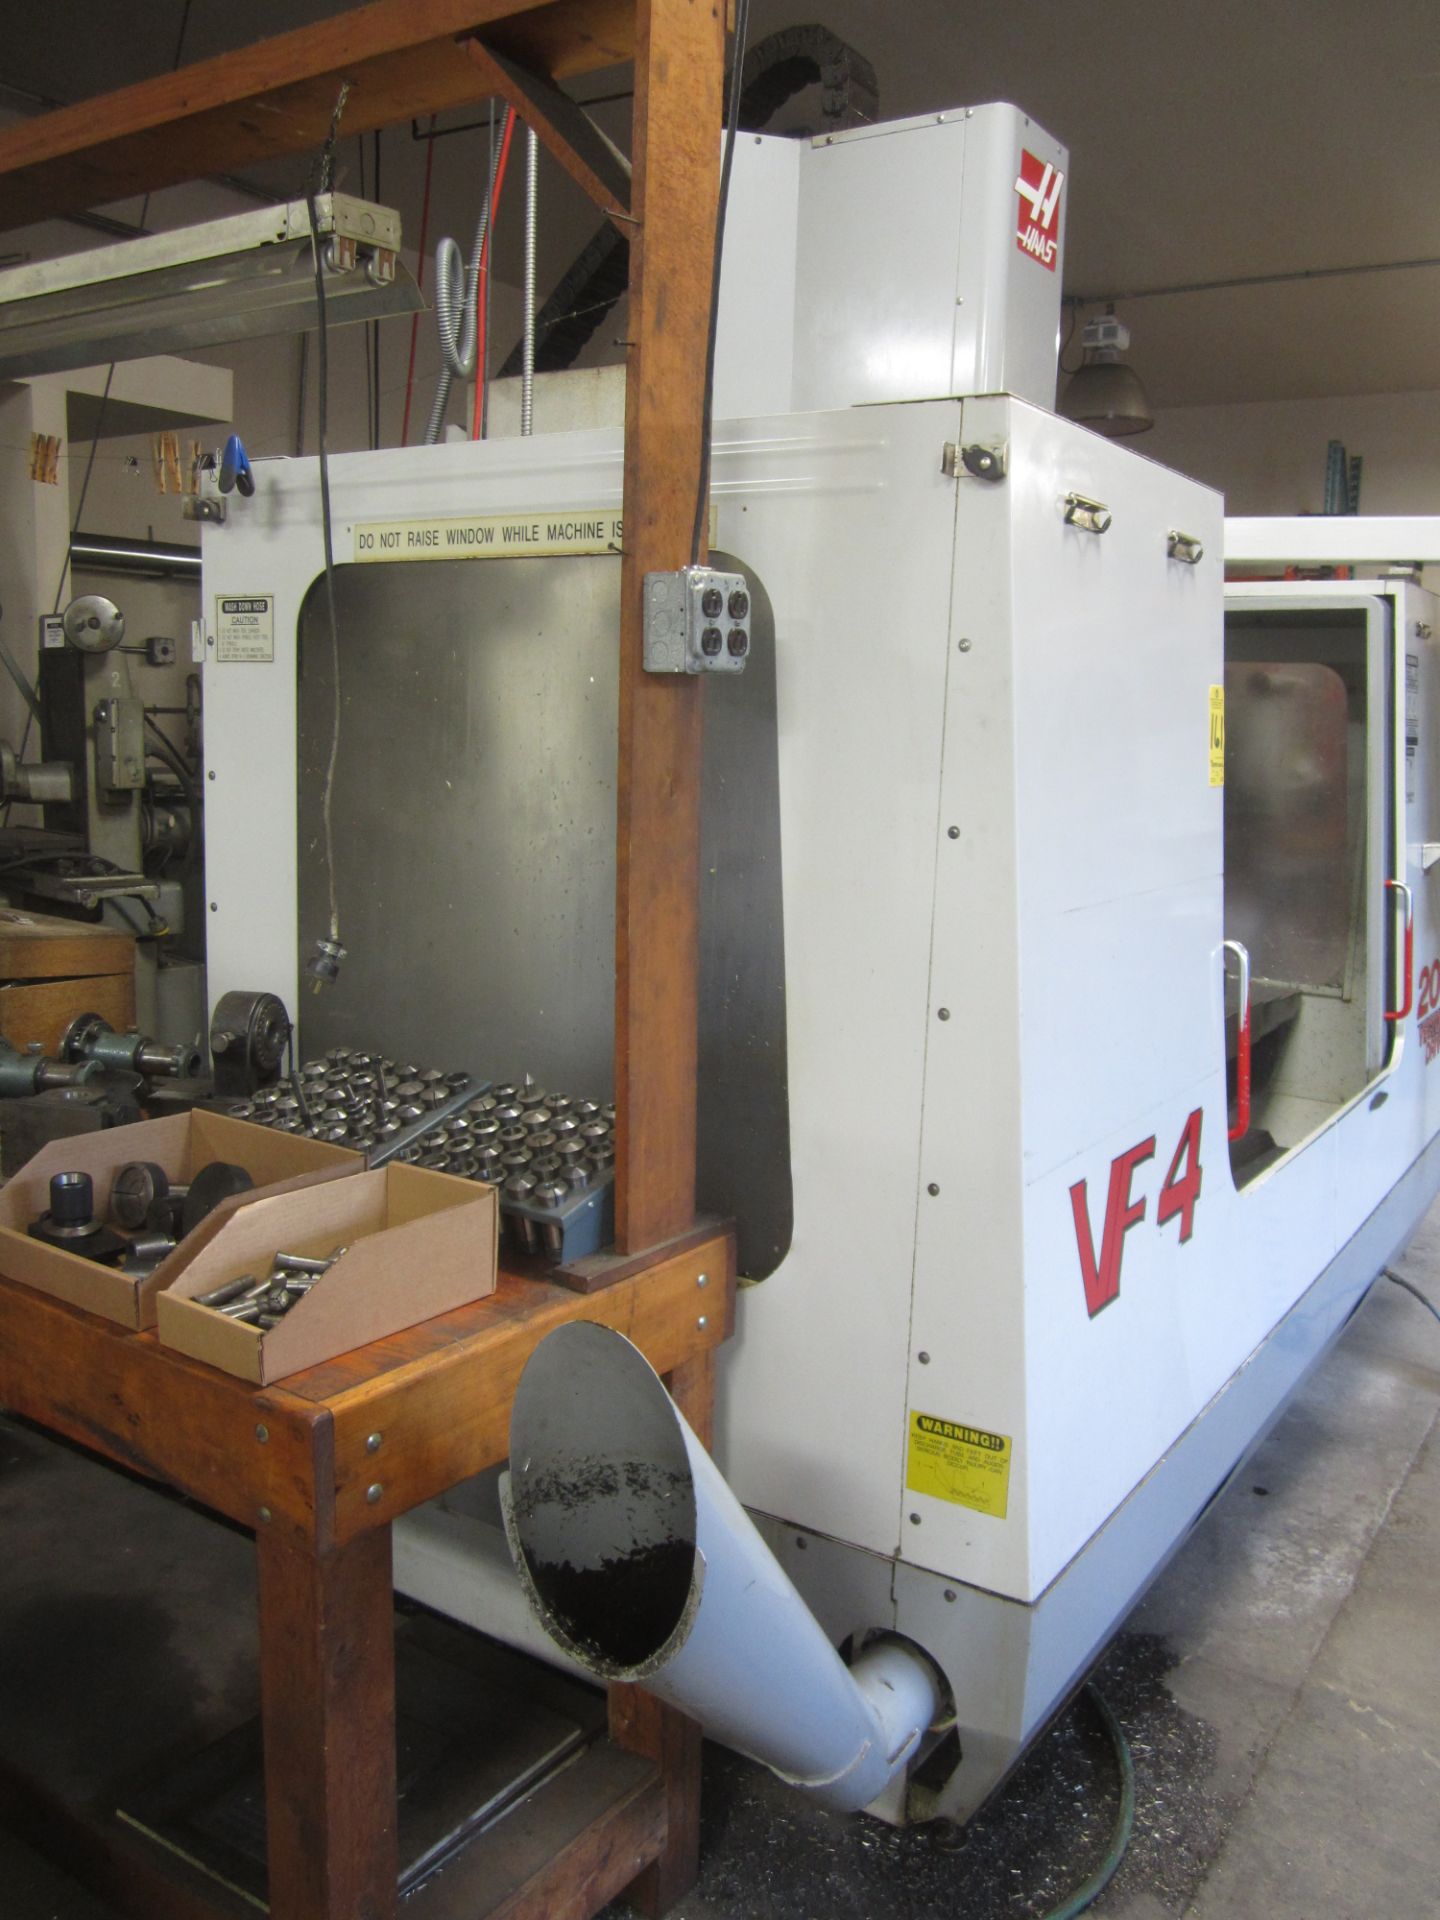 Haas VF-4 CNC Vertical Machining Center, s/n 20228, New 2000, Haas CNC Control, 20 HP, 40 Taper, - Image 15 of 16